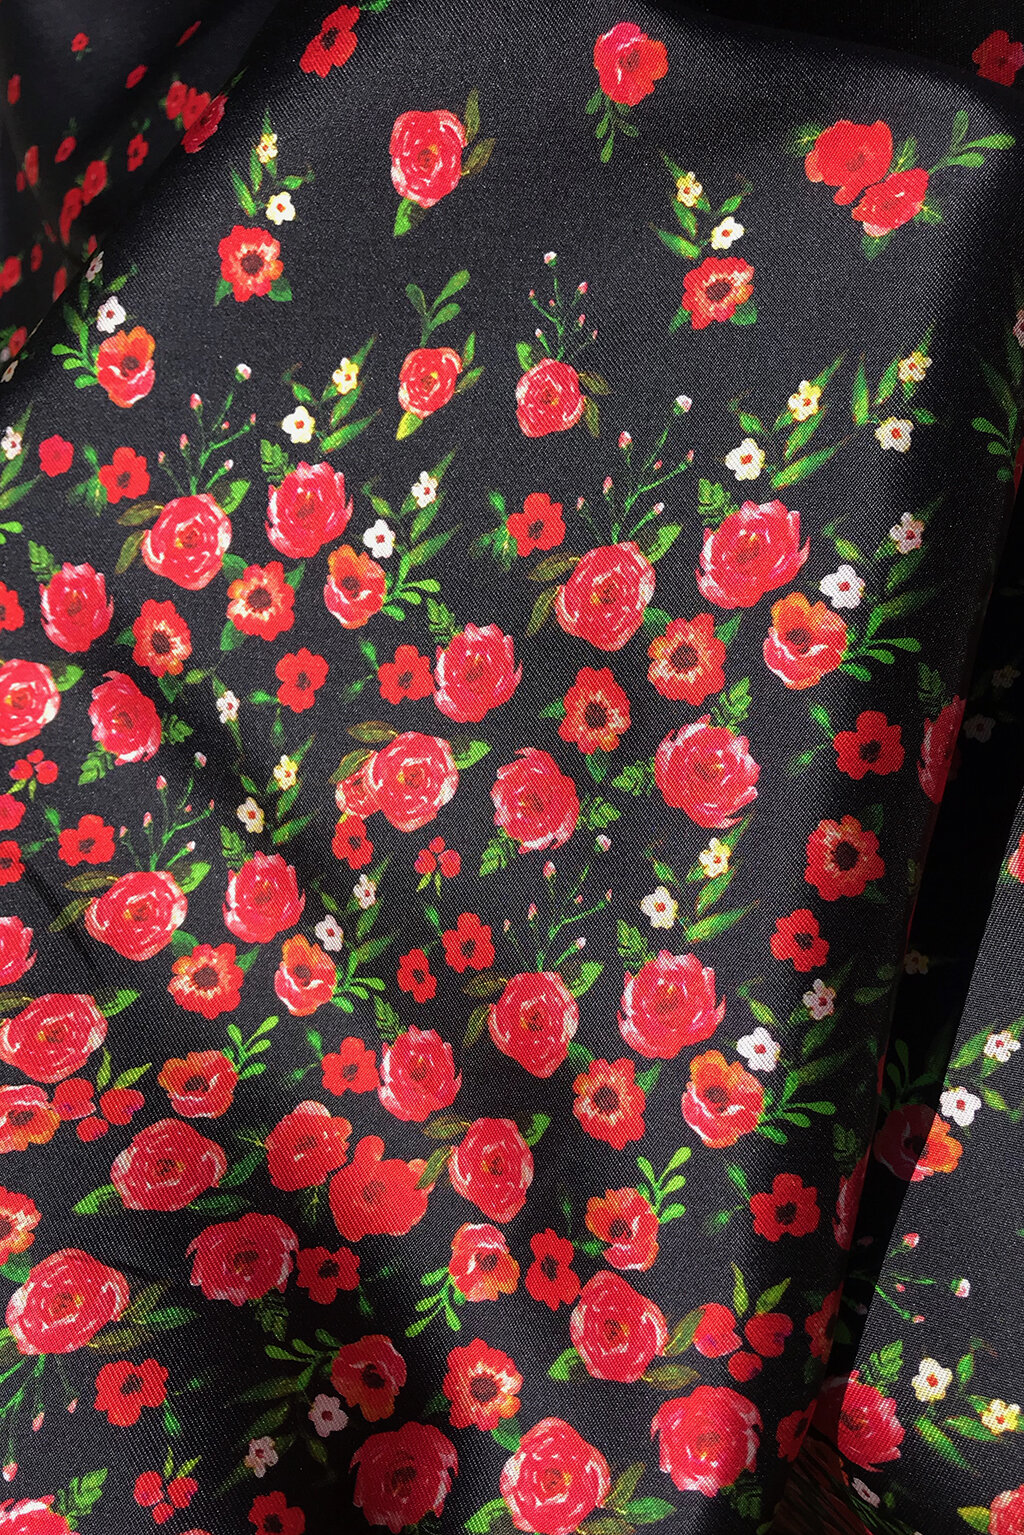 Silk/Cotton blend in black with red rose print — Fabrics at Play